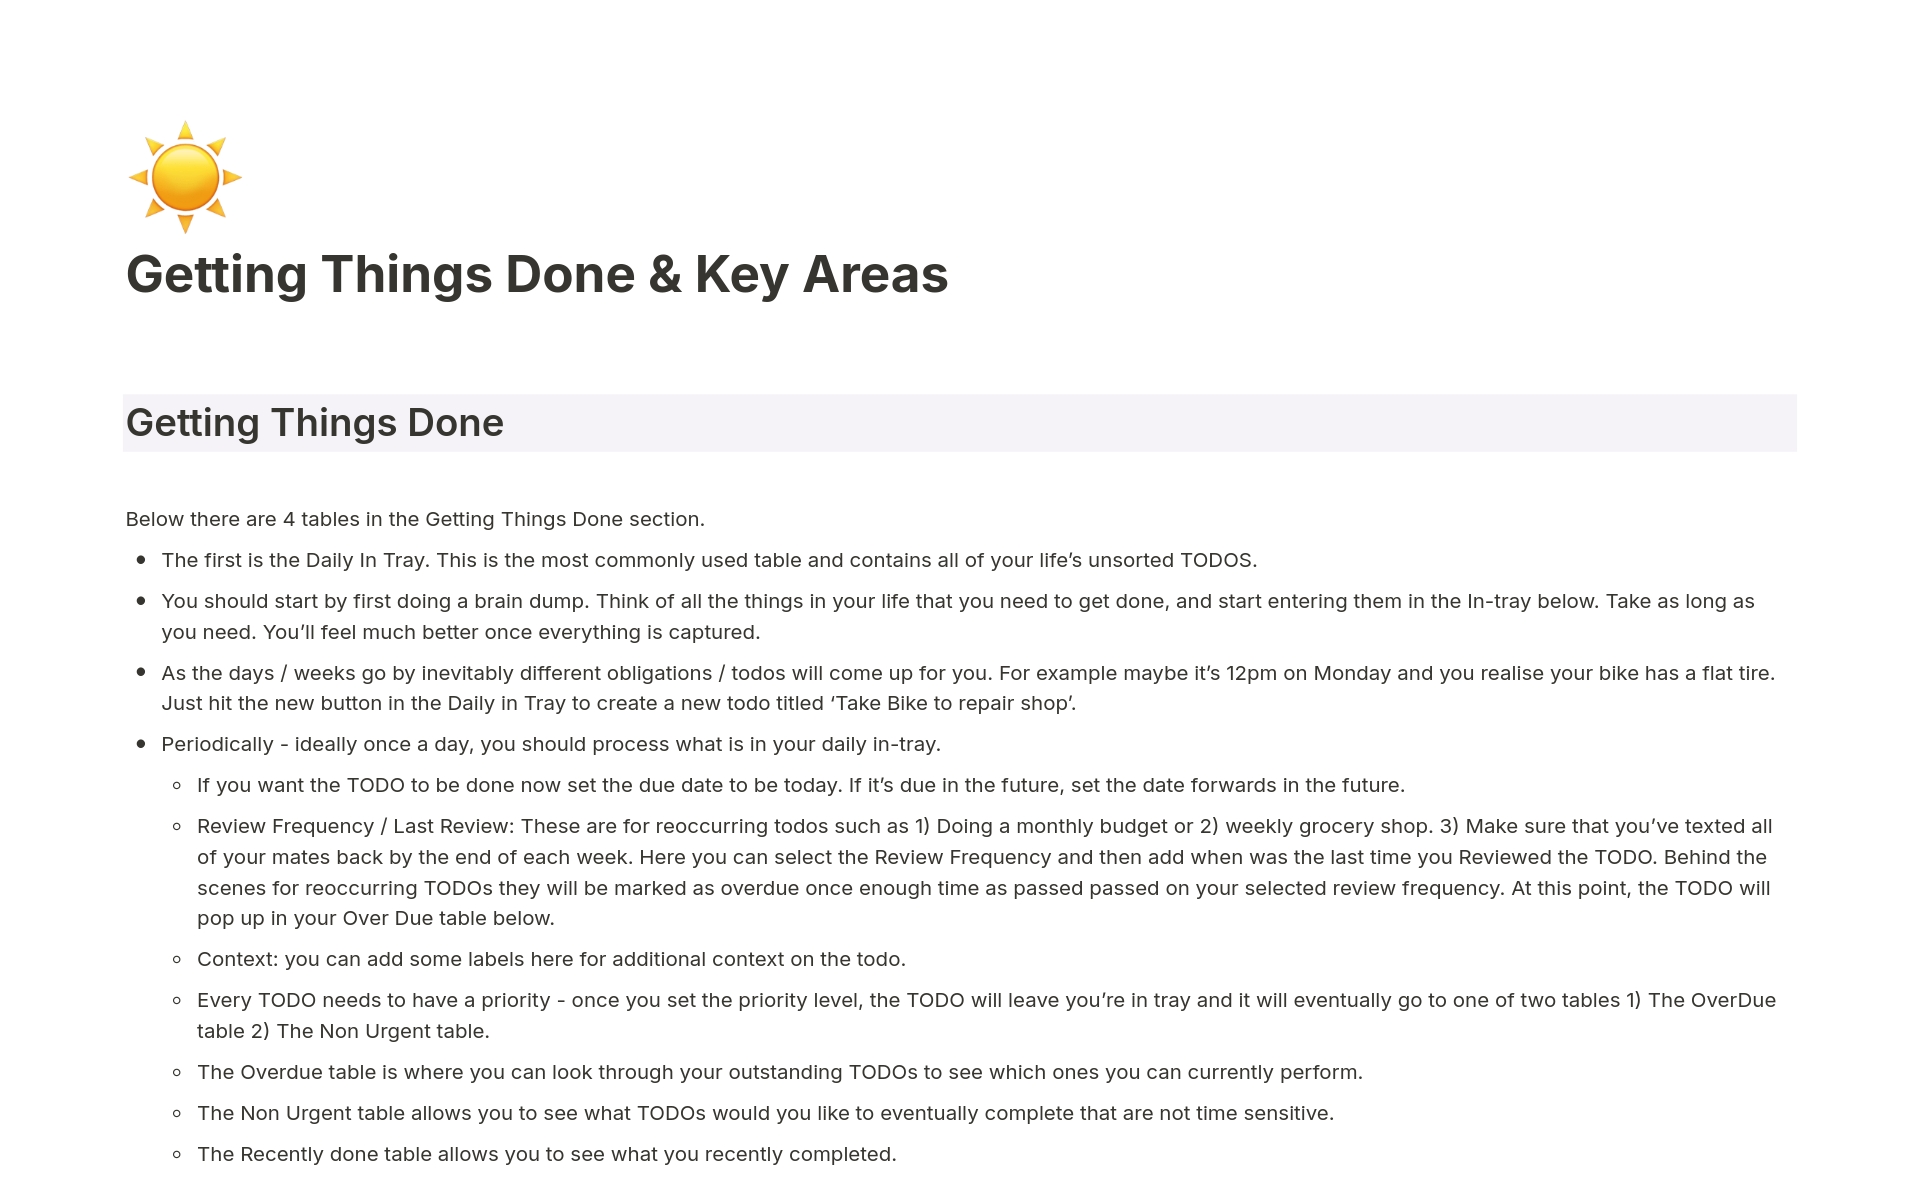 A template for a getting things done system. Great way to organise the TODOs of your life in a way that isn't excessively detailed. Also contains a key areas section for organising different important projects / areas of your life. 